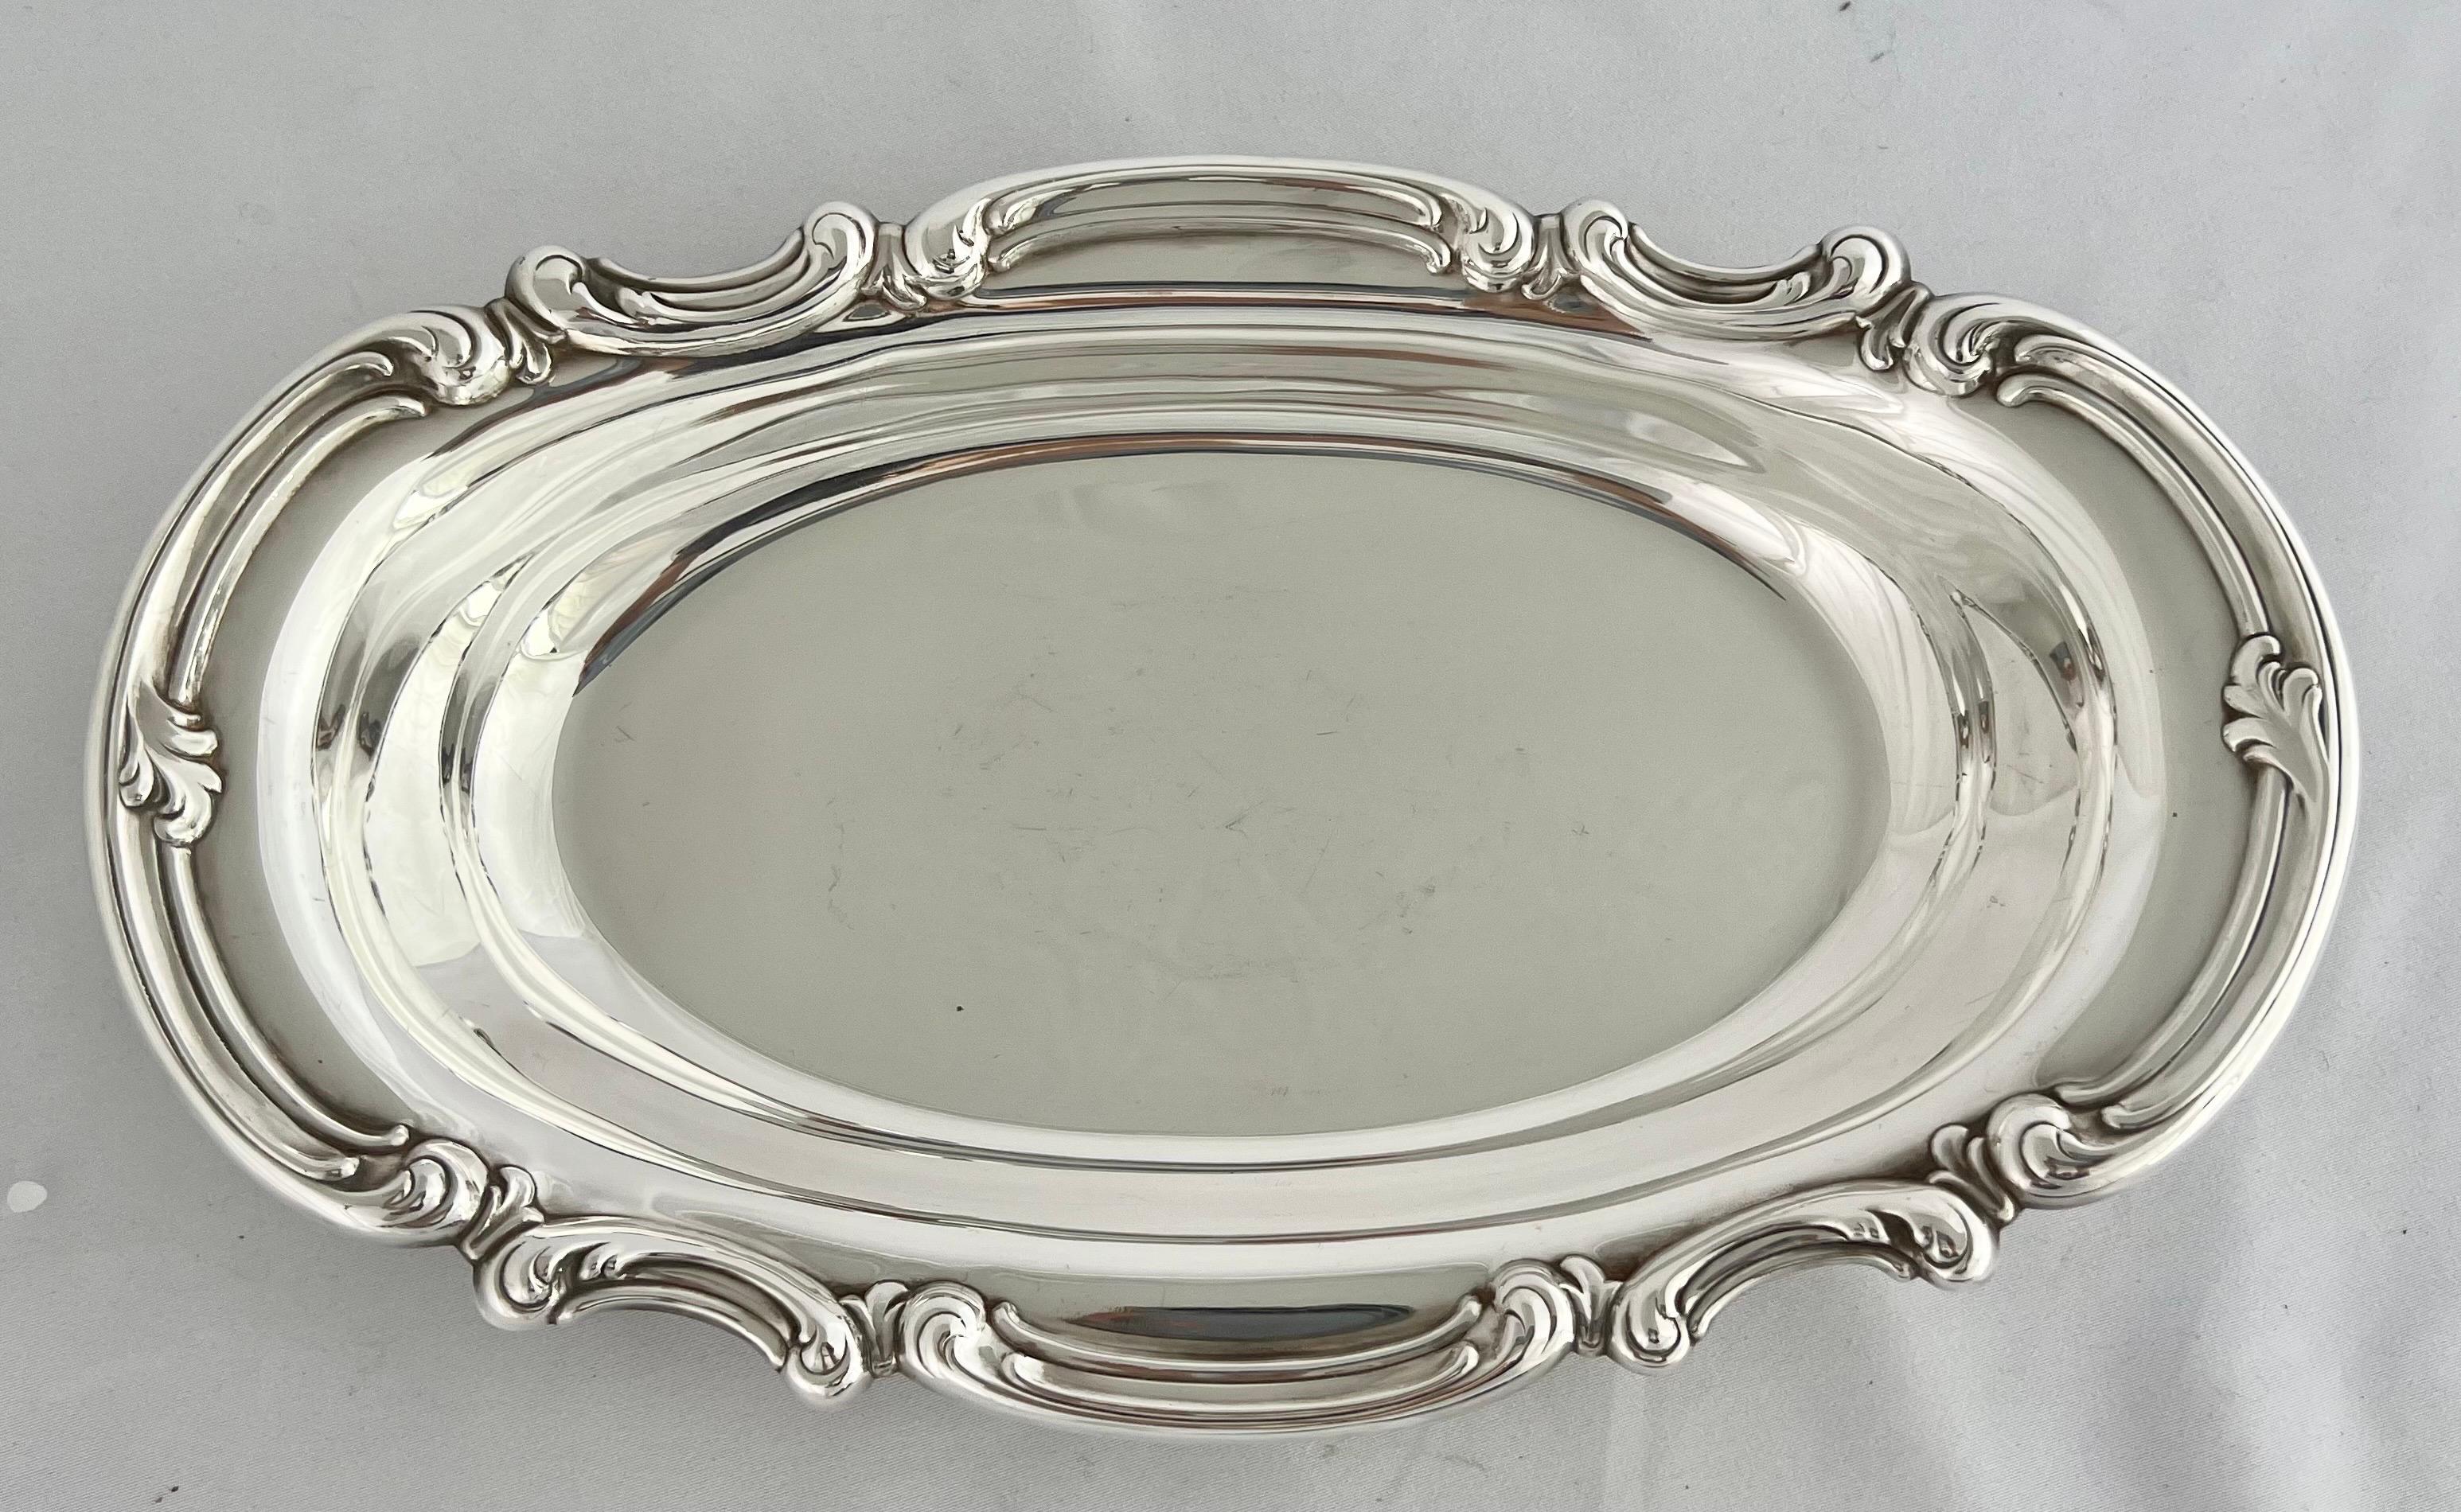 American Gorham silver plated serving dish with scrolled detail around the edge of the piece. It would be great to serve food but you can also use it for hand towels in you powder room. The dish is hallmarked Gorham with an anchor.